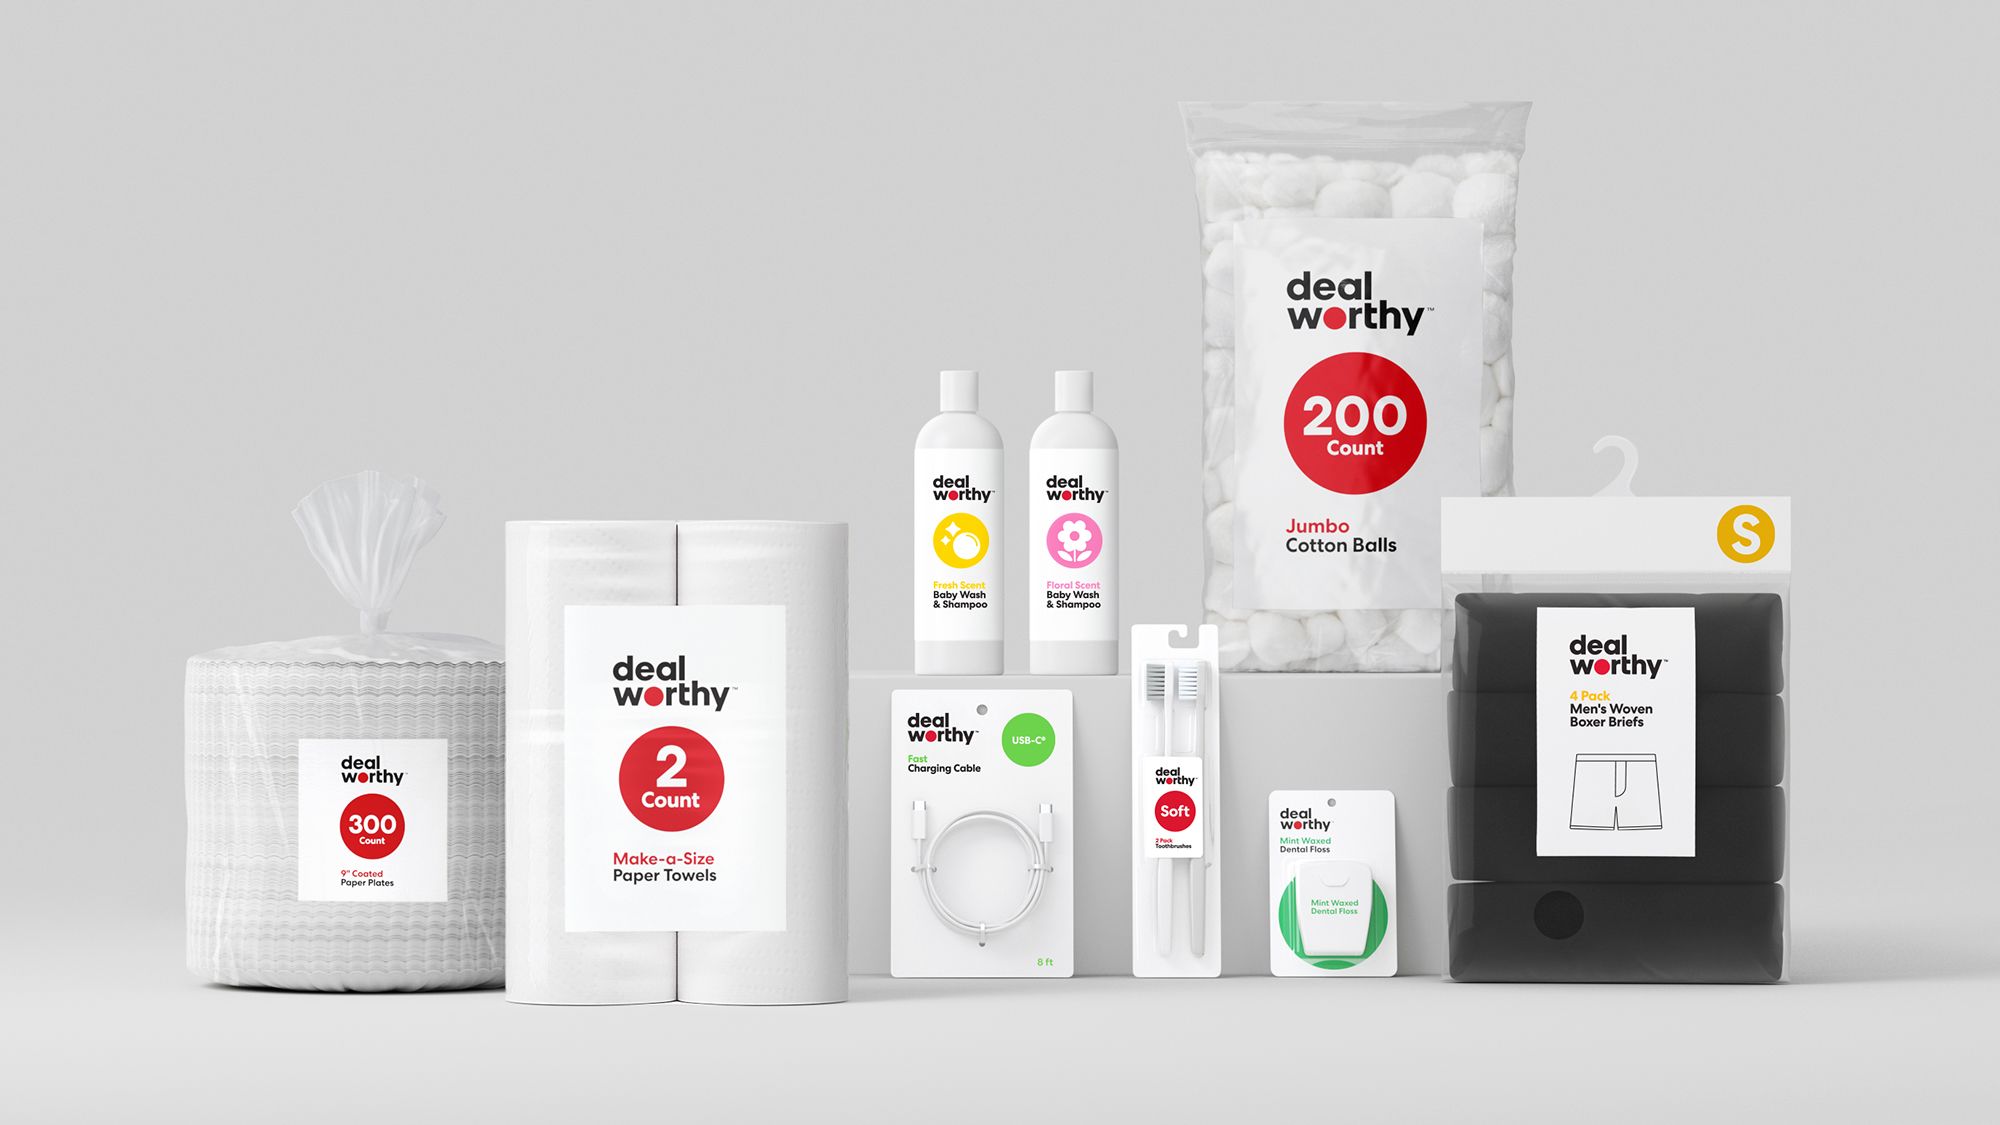 Target is launching Dealworthy, a new value brand.